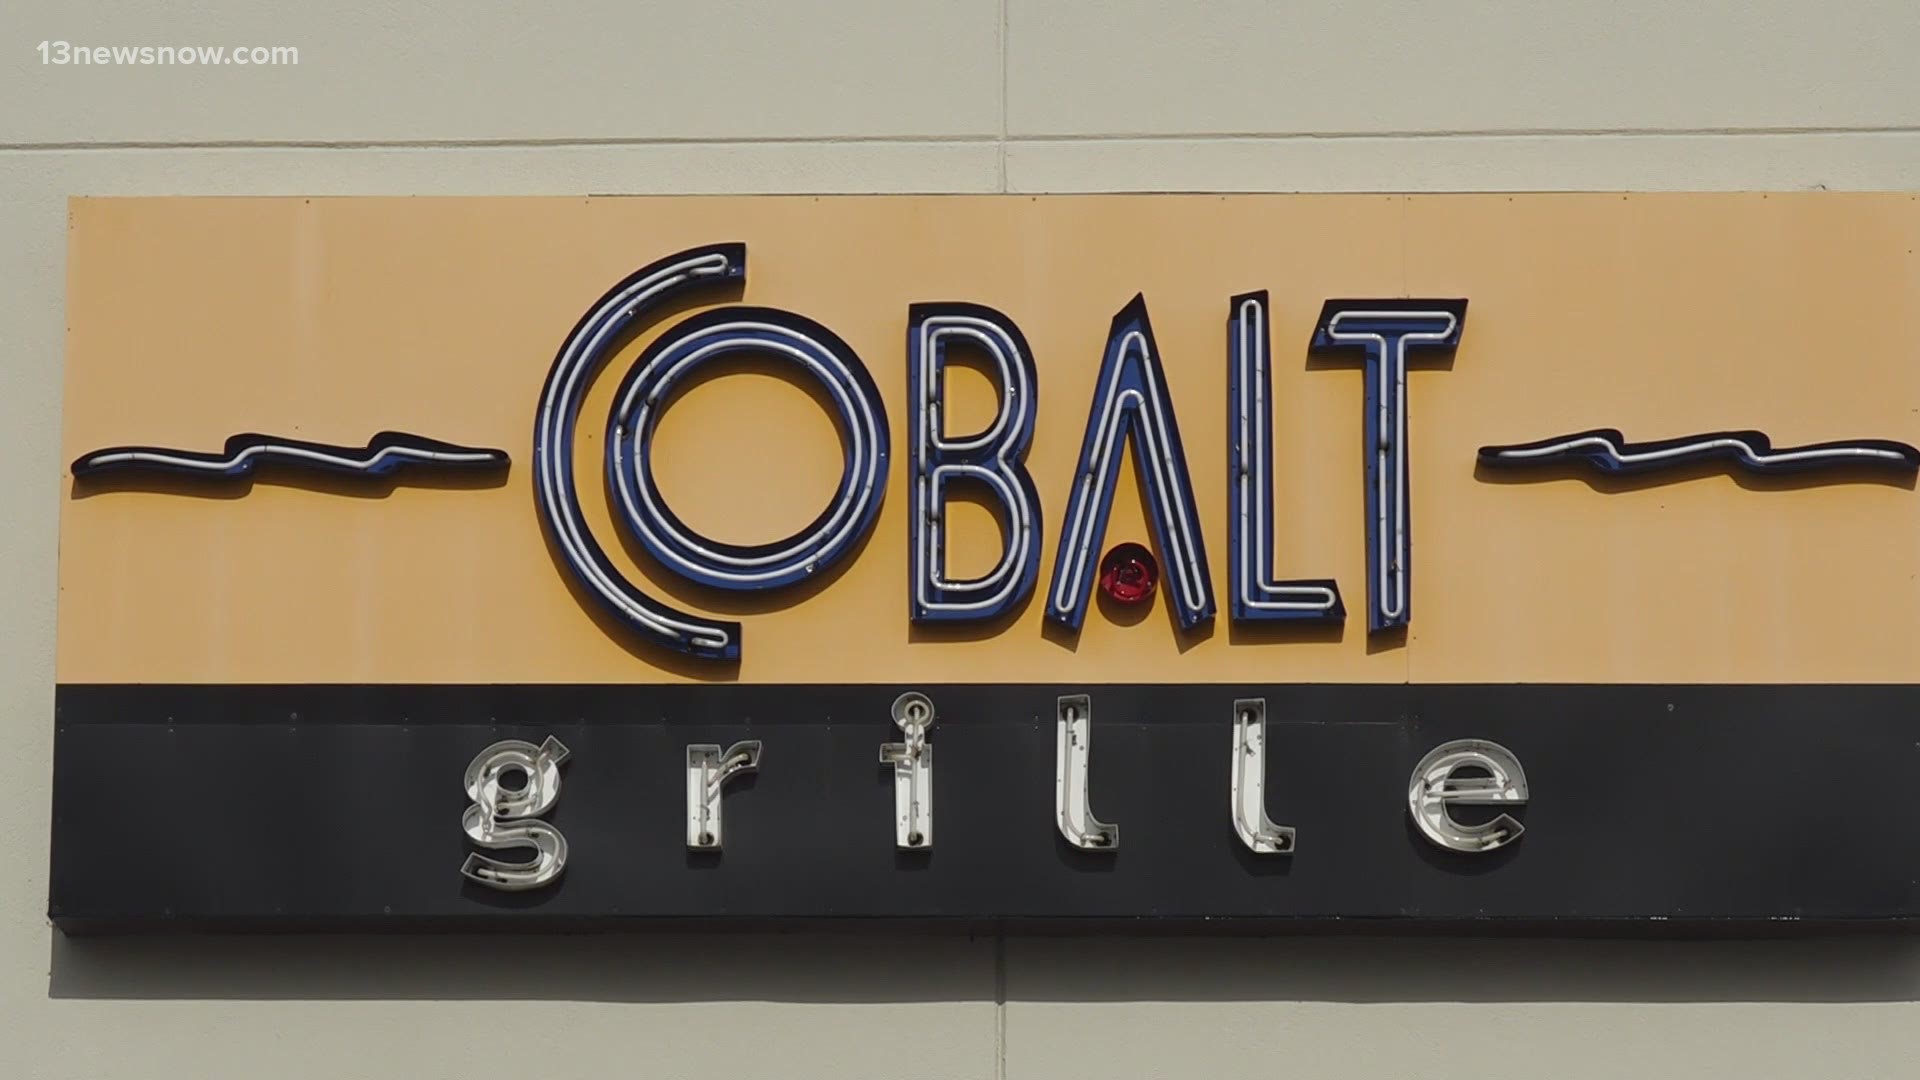 Cobalt Grille in Virginia Beach did something new this year with the pandemic in mind. It started serving Thanksgiving meals for people to take home.